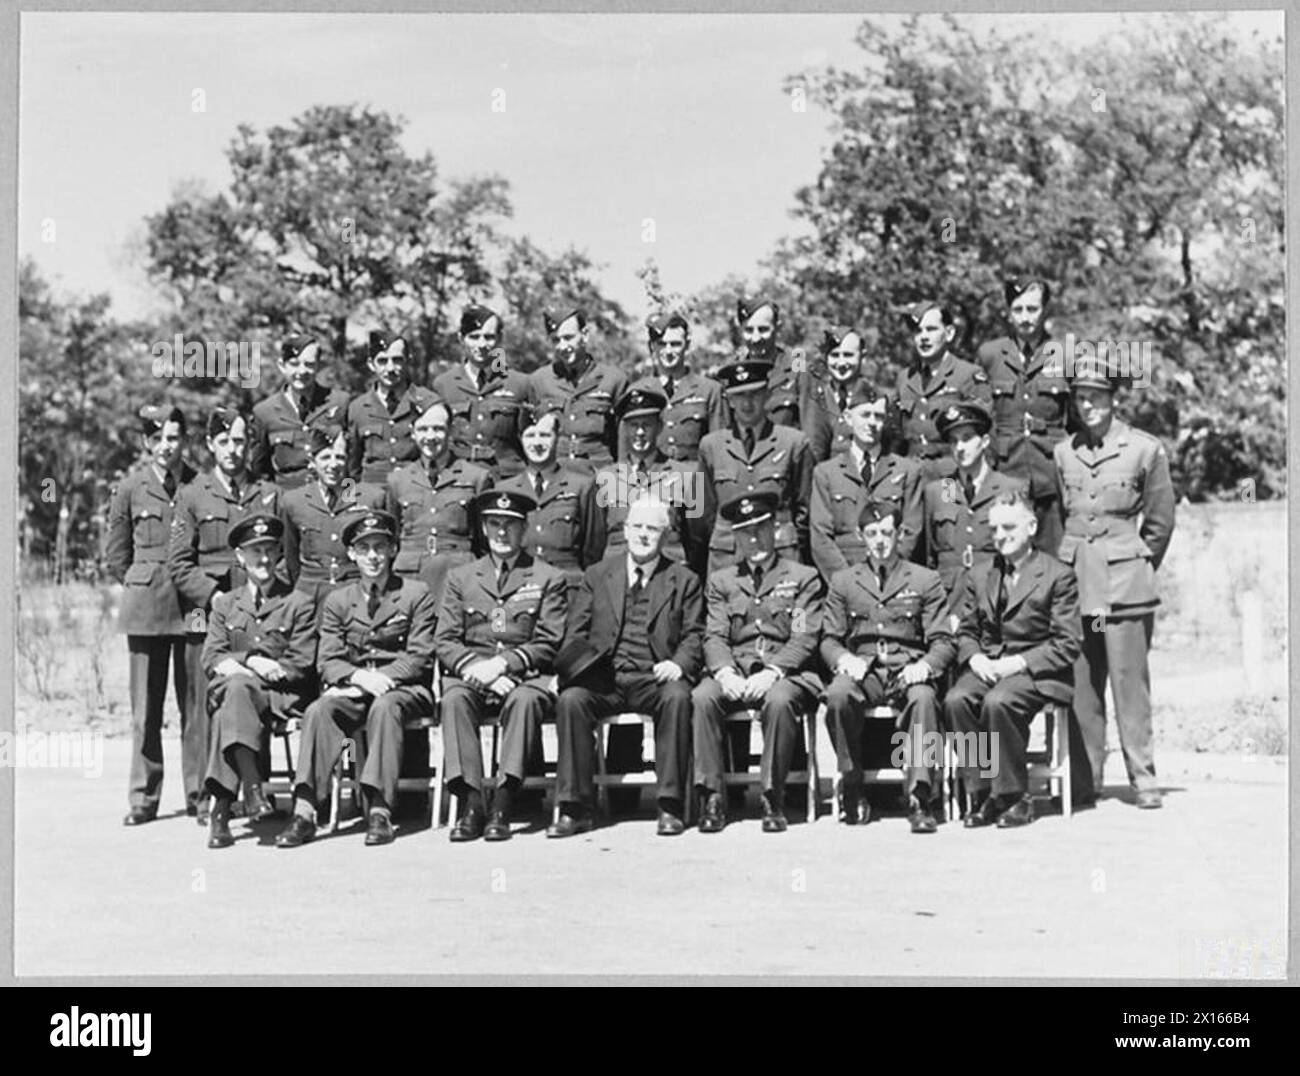 HIGH COMMISSIONER VISITS NEW ZEALAND AIRMEN AT R.A.F. BOMBER STATION. - [Picture issued 1942] Mr. W.J. Jordan, High Commissioner for New Zealand, visited an R.A.F. Bomber Station, where he was photographed with air crews from New Zealand. The New Zealand High Commissioner with men of the bomber station - left to right - Front Row Squadron Leader Gamble, Squadron Leader Thiele, Air Vice Marshal Carr CBE.,DFC.,AFC., Mr. W.J. Jordan, High Commissioner; Croup Captain C.Graham, MC., Squadron Leader P.B. Robinson, and Mr. S.Skinner of New Zealand House Royal Air Force Stock Photo